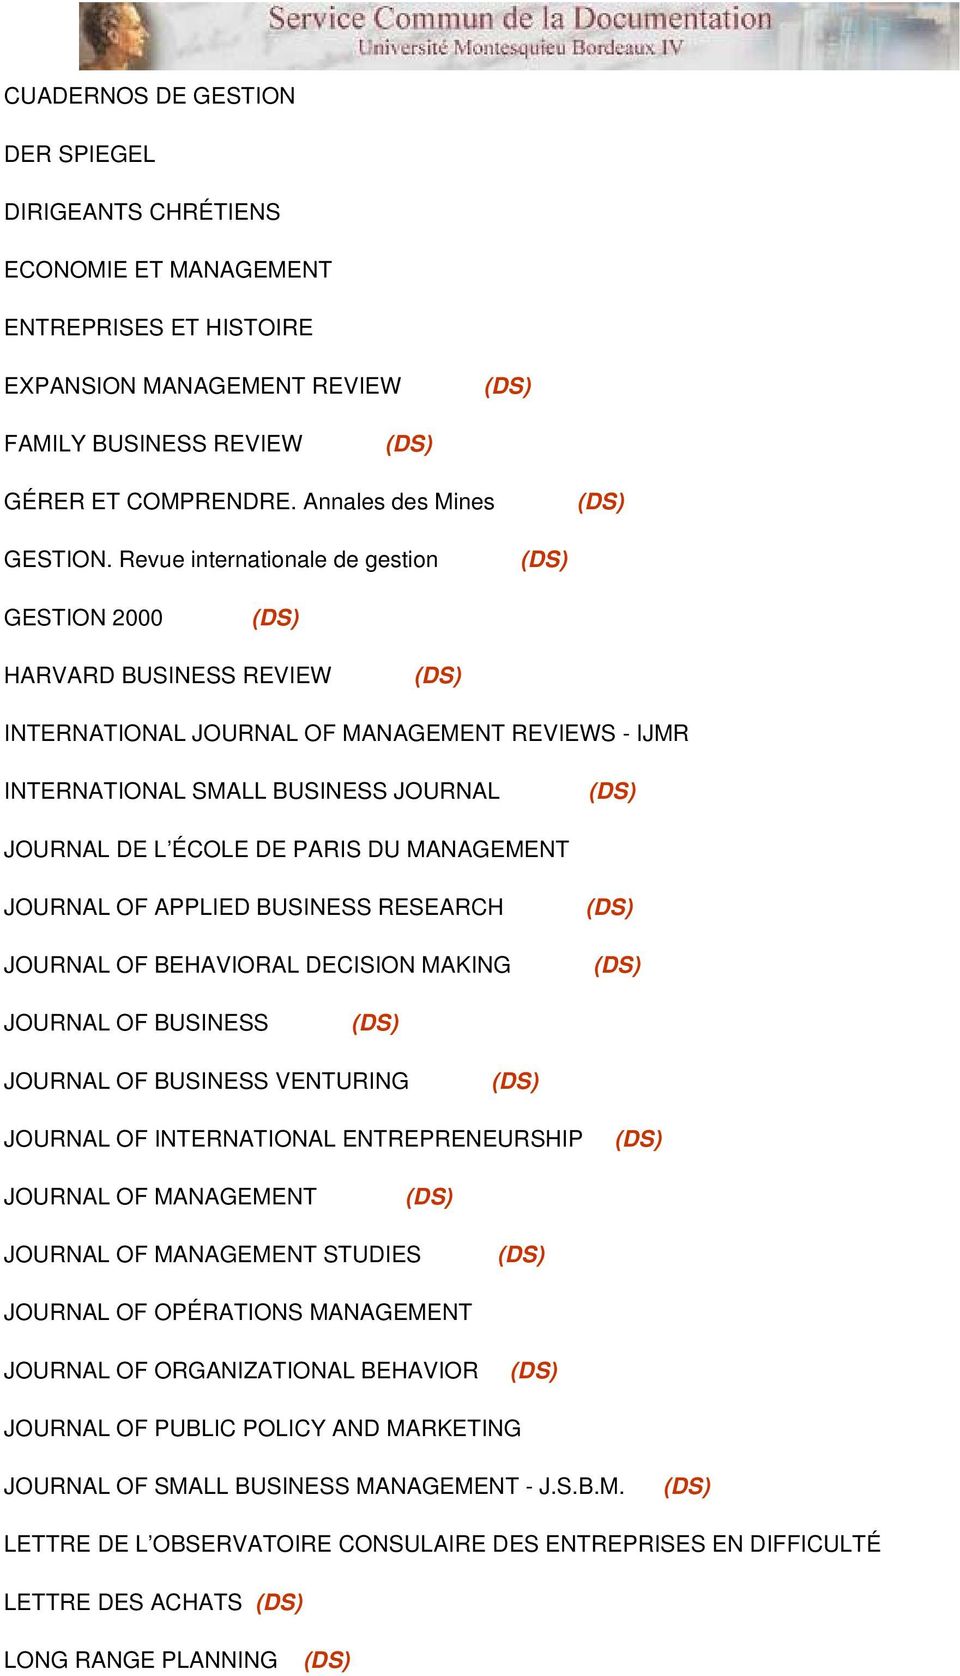 JOURNAL OF APPLIED BUSINESS RESEARCH JOURNAL OF BEHAVIORAL DECISION MAKING JOURNAL OF BUSINESS JOURNAL OF BUSINESS VENTURING JOURNAL OF INTERNATIONAL ENTREPRENEURSHIP JOURNAL OF MANAGEMENT JOURNAL OF